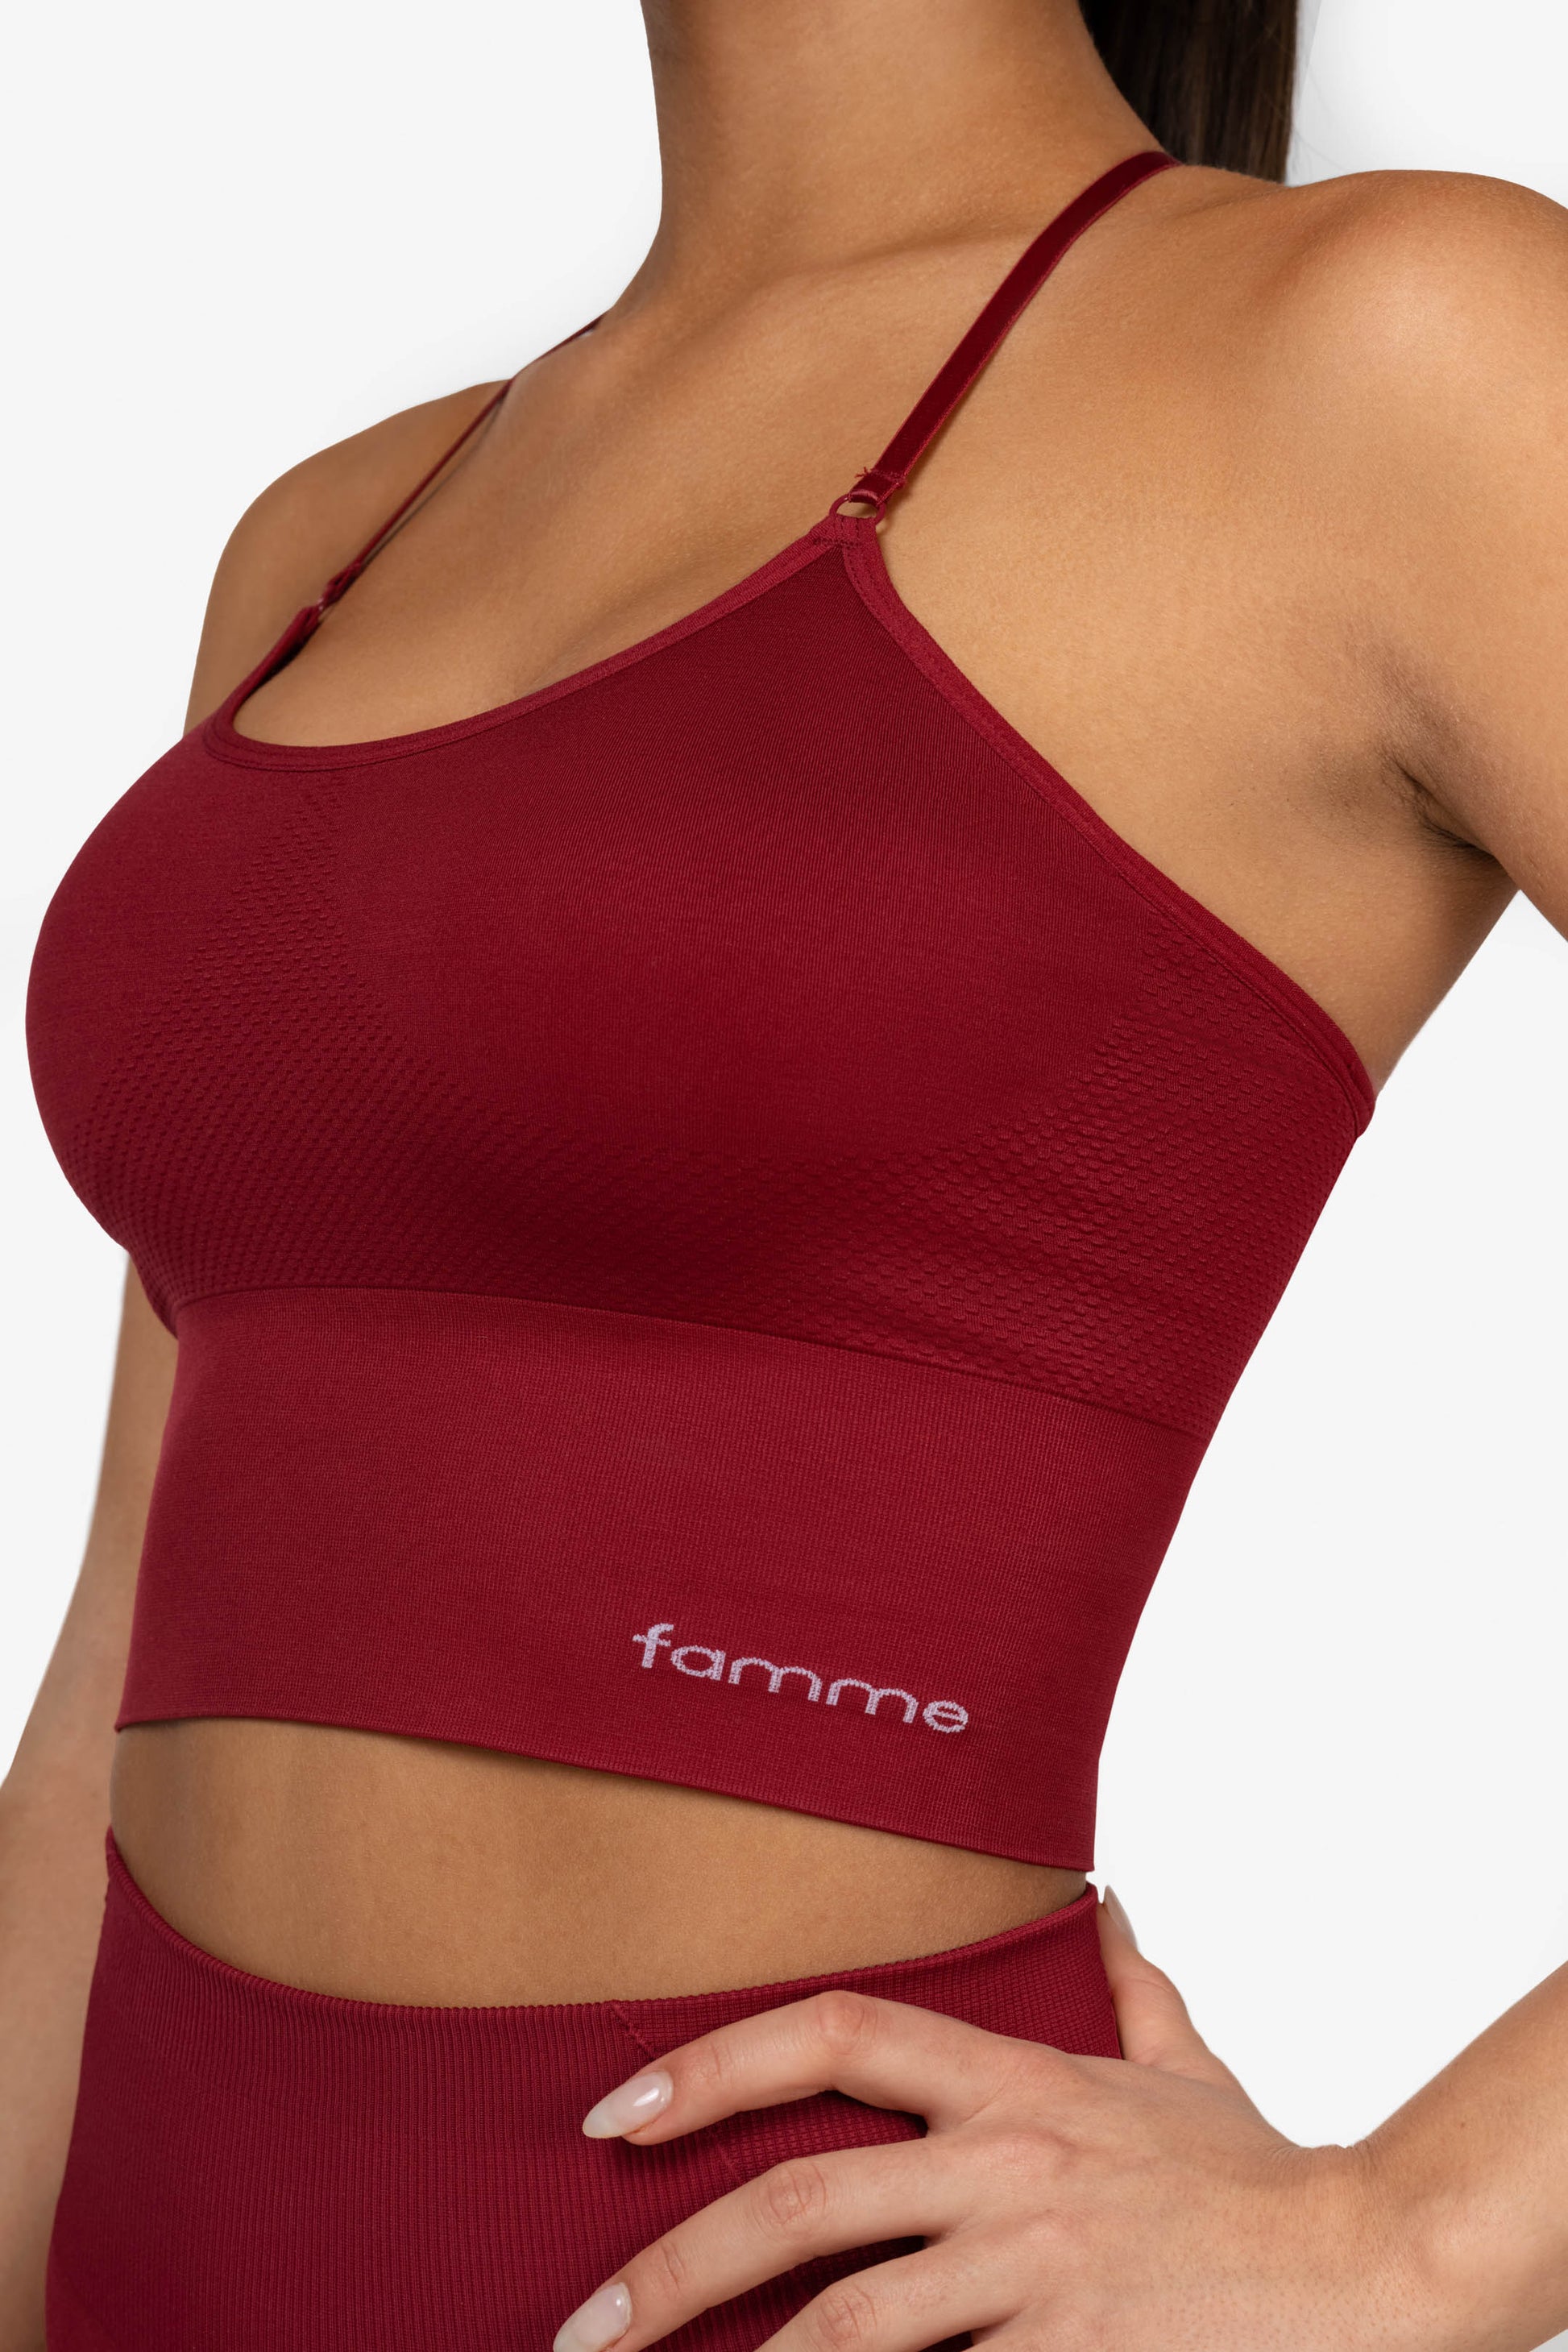 Red Power Seamless Top - for dame - Famme - Crop Top